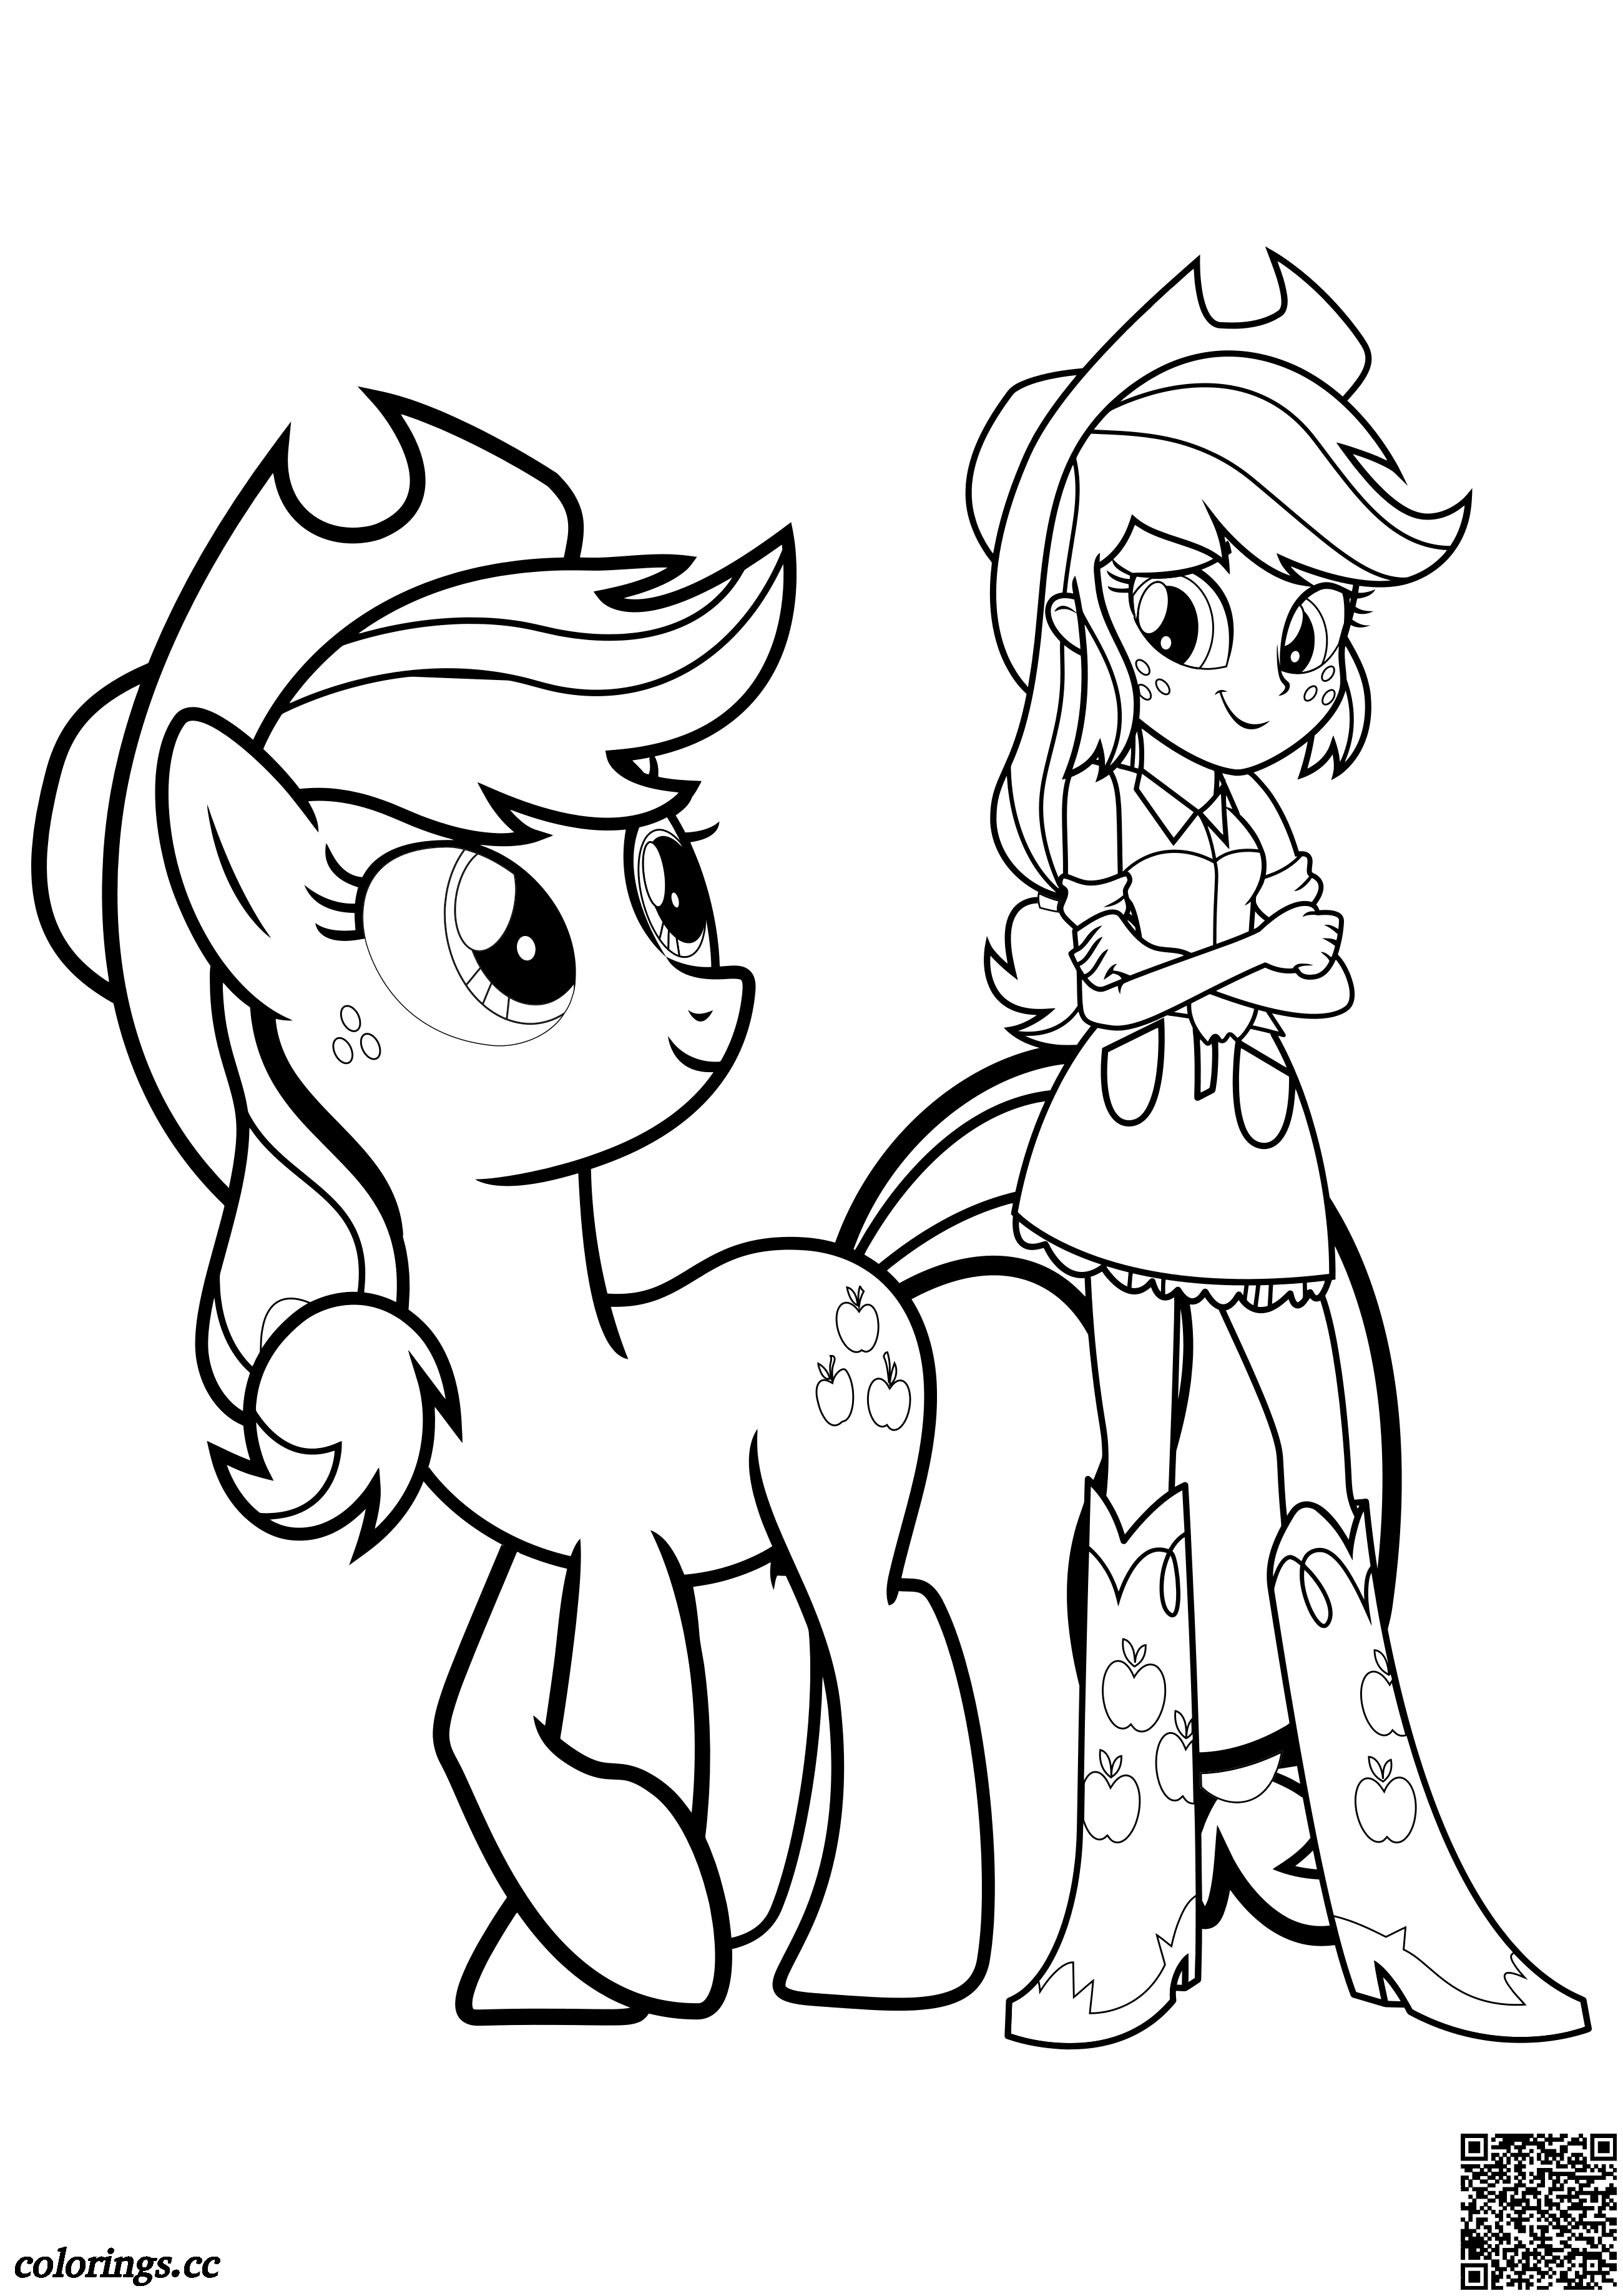 Applejack pony and Applejack girl coloring pages, My Little Pony ...